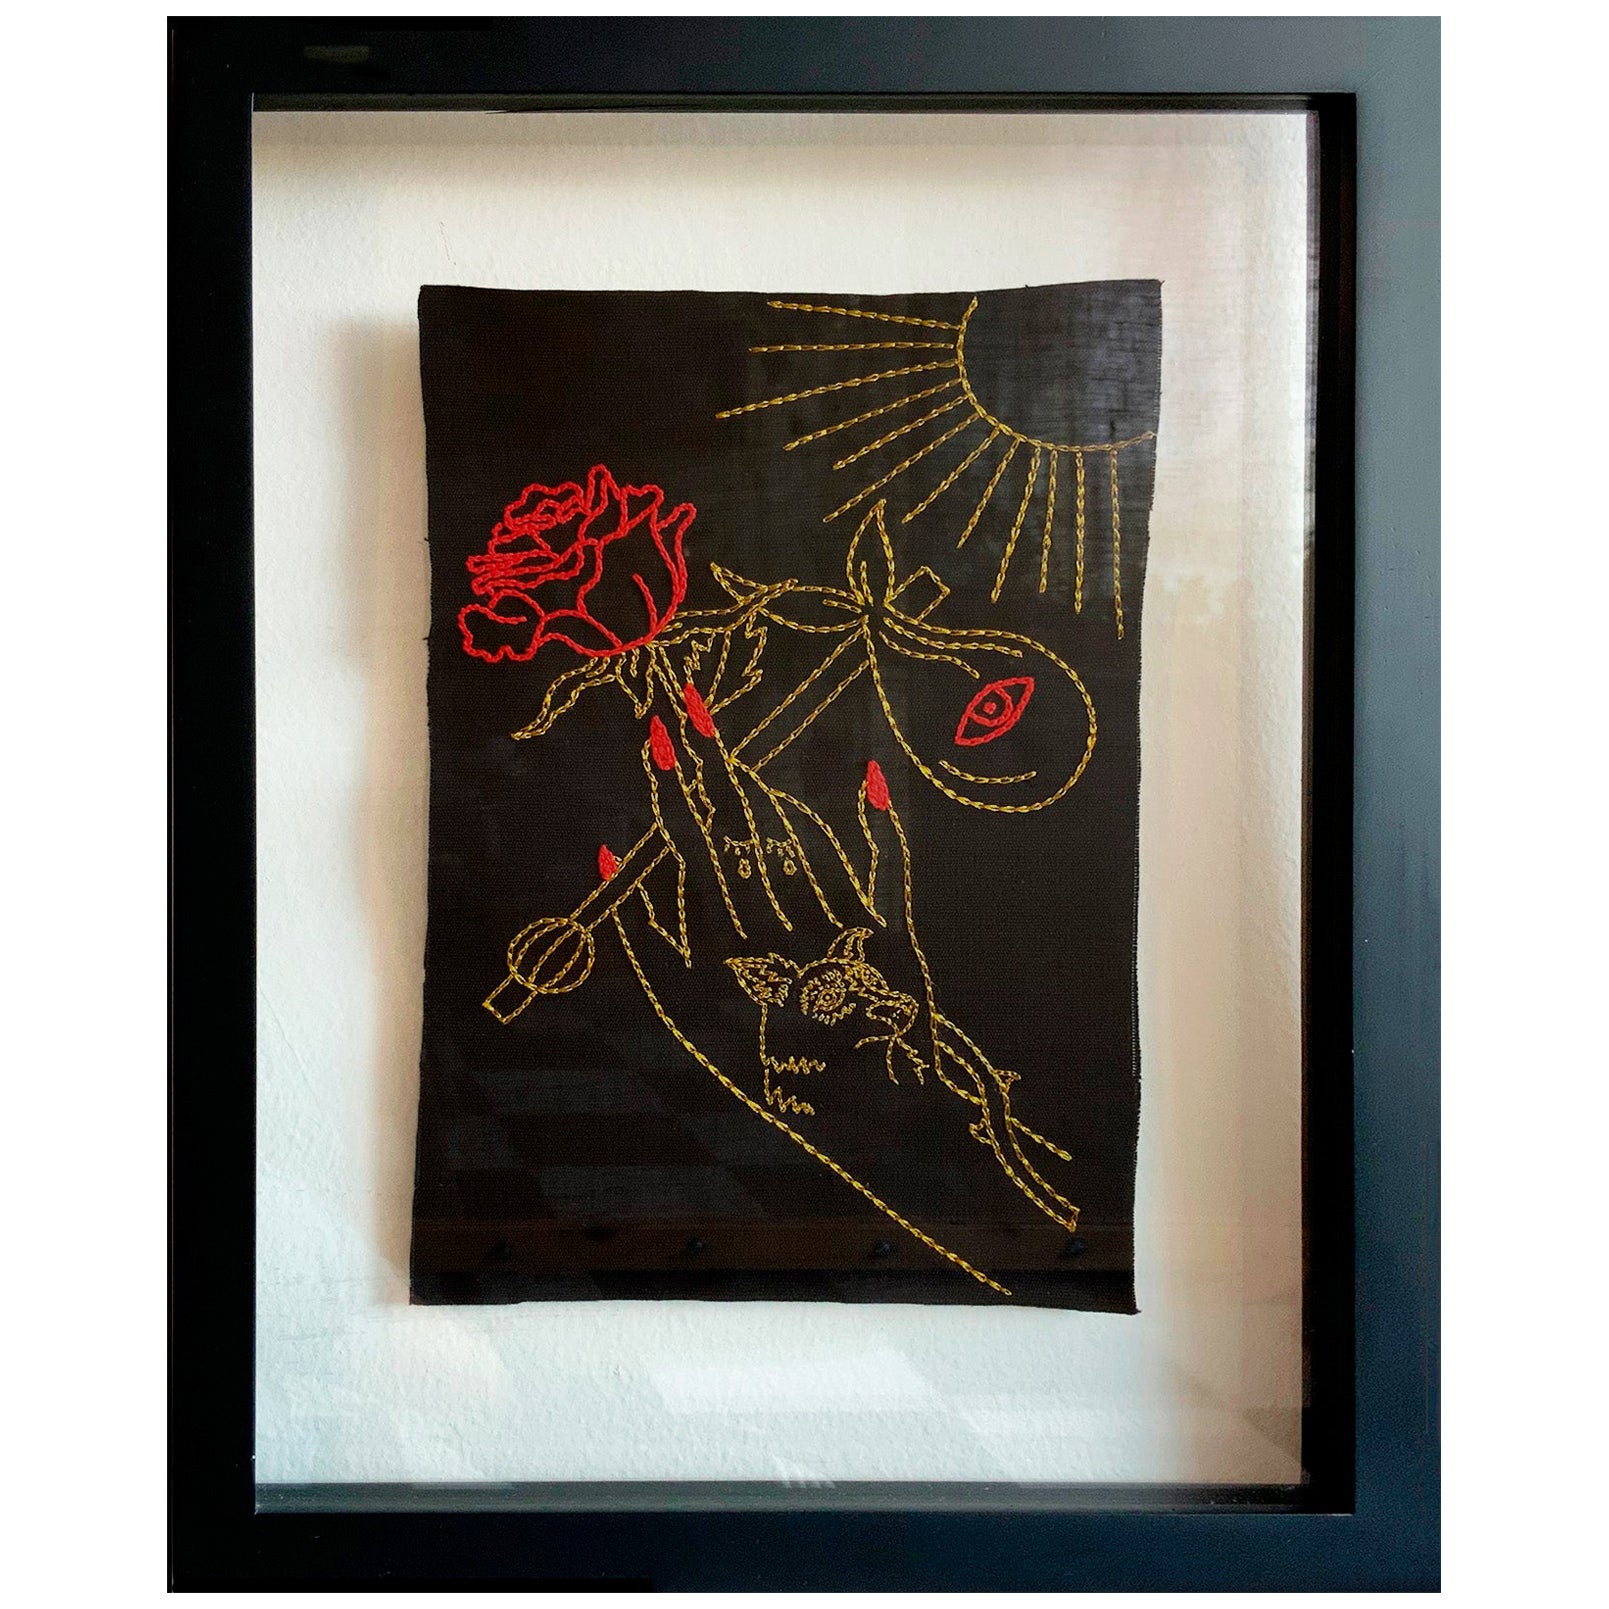 El Loco. From The Ventura Series. Embroidery thread on canvas. Framed For Sale